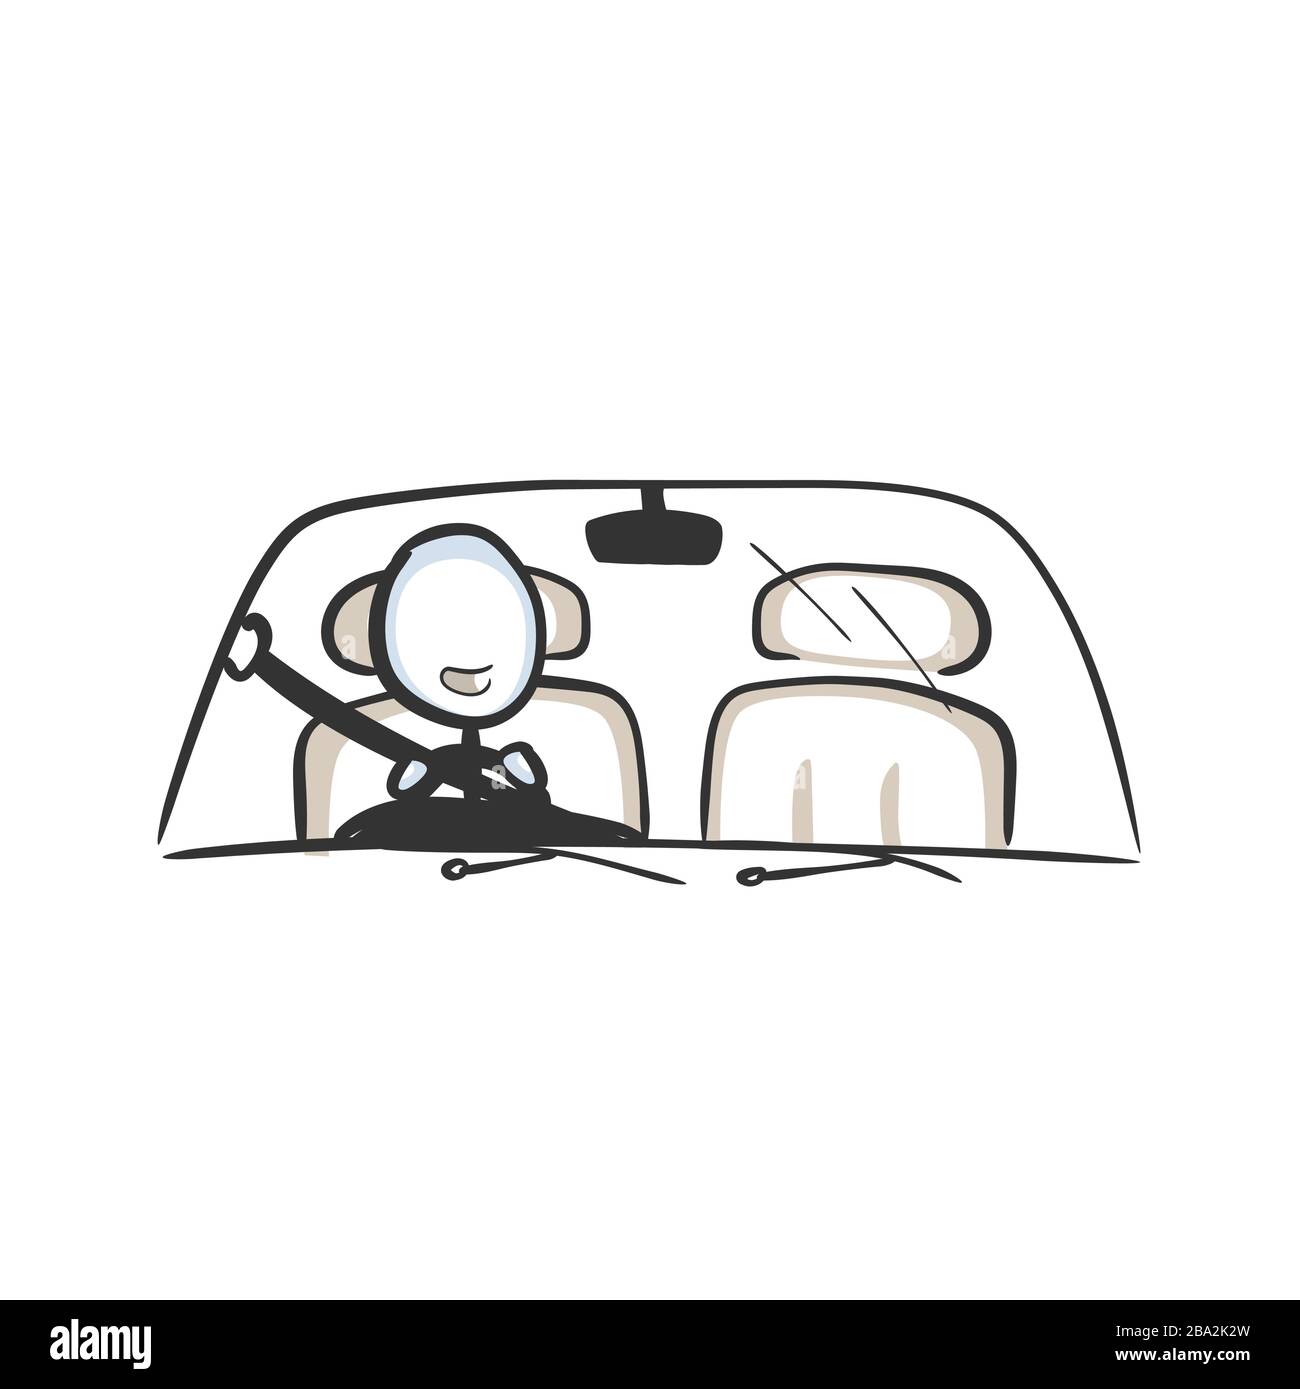 Man in car. Driving a vehicle. Safety belt fastened. Hand drawn. Stickman cartoon. Doodle sketch, Vector graphic illustration Stock Vector